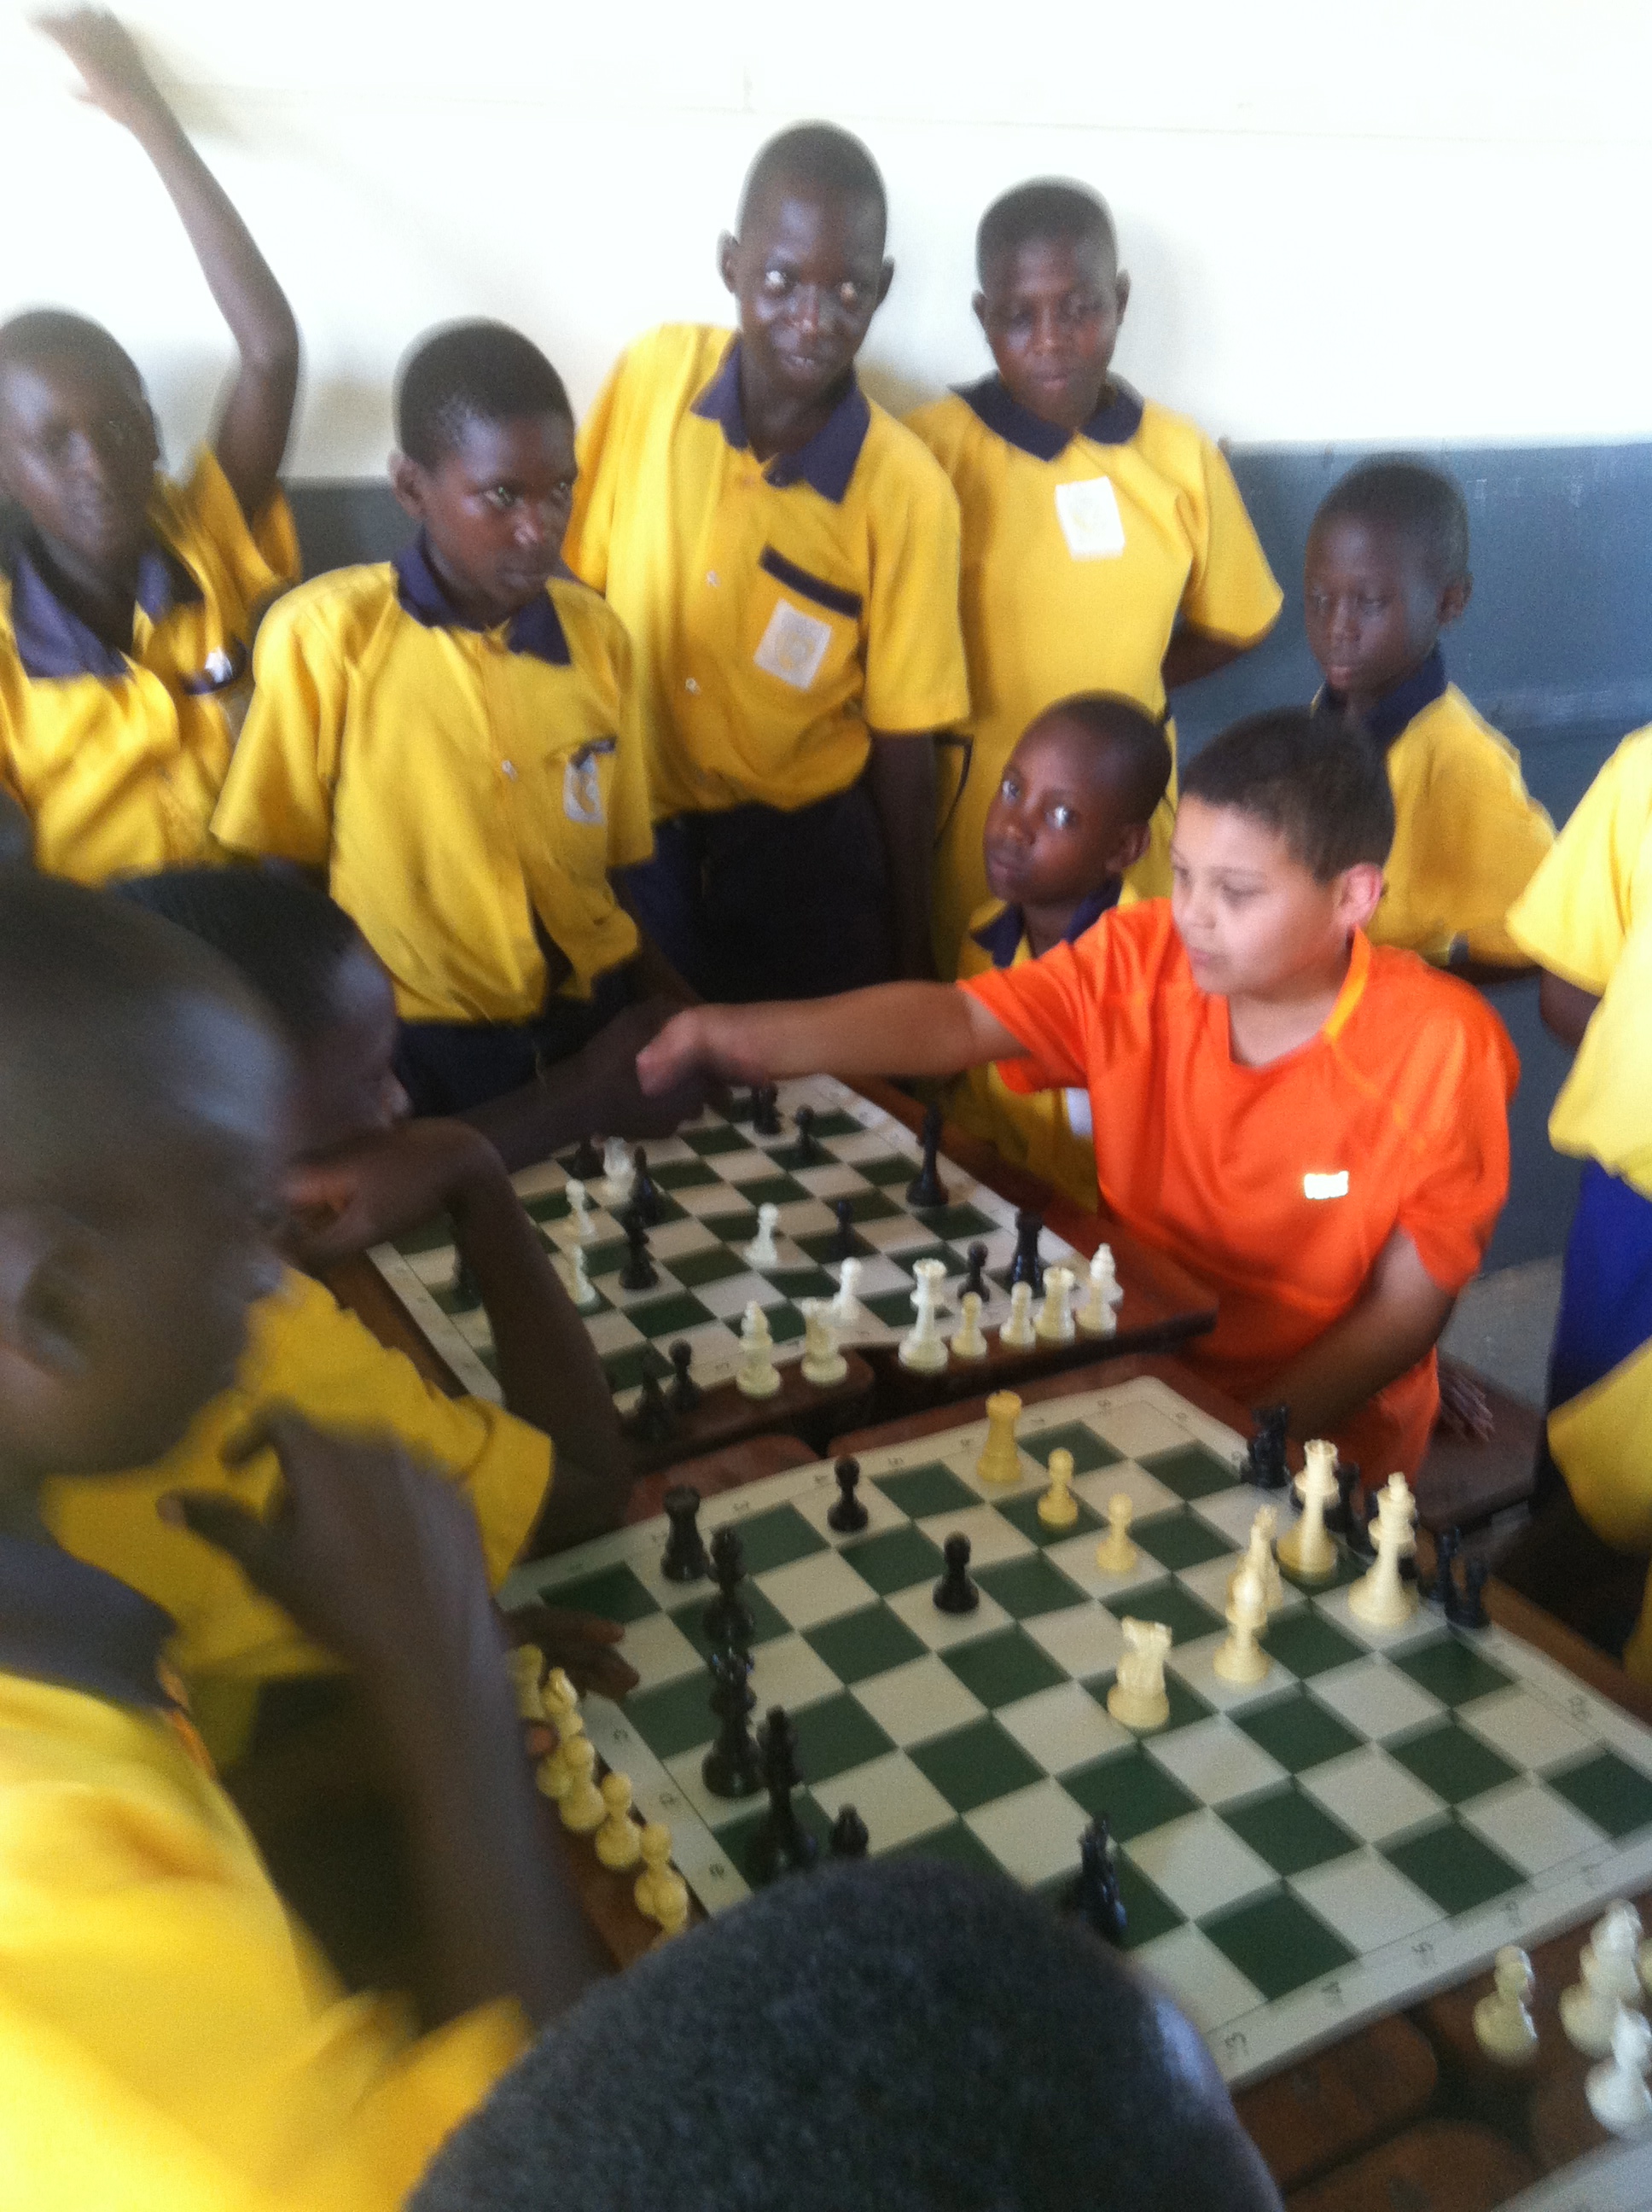 Always show Good Sportsmanship by shaking hands at the conclusion of each Chess Match!!